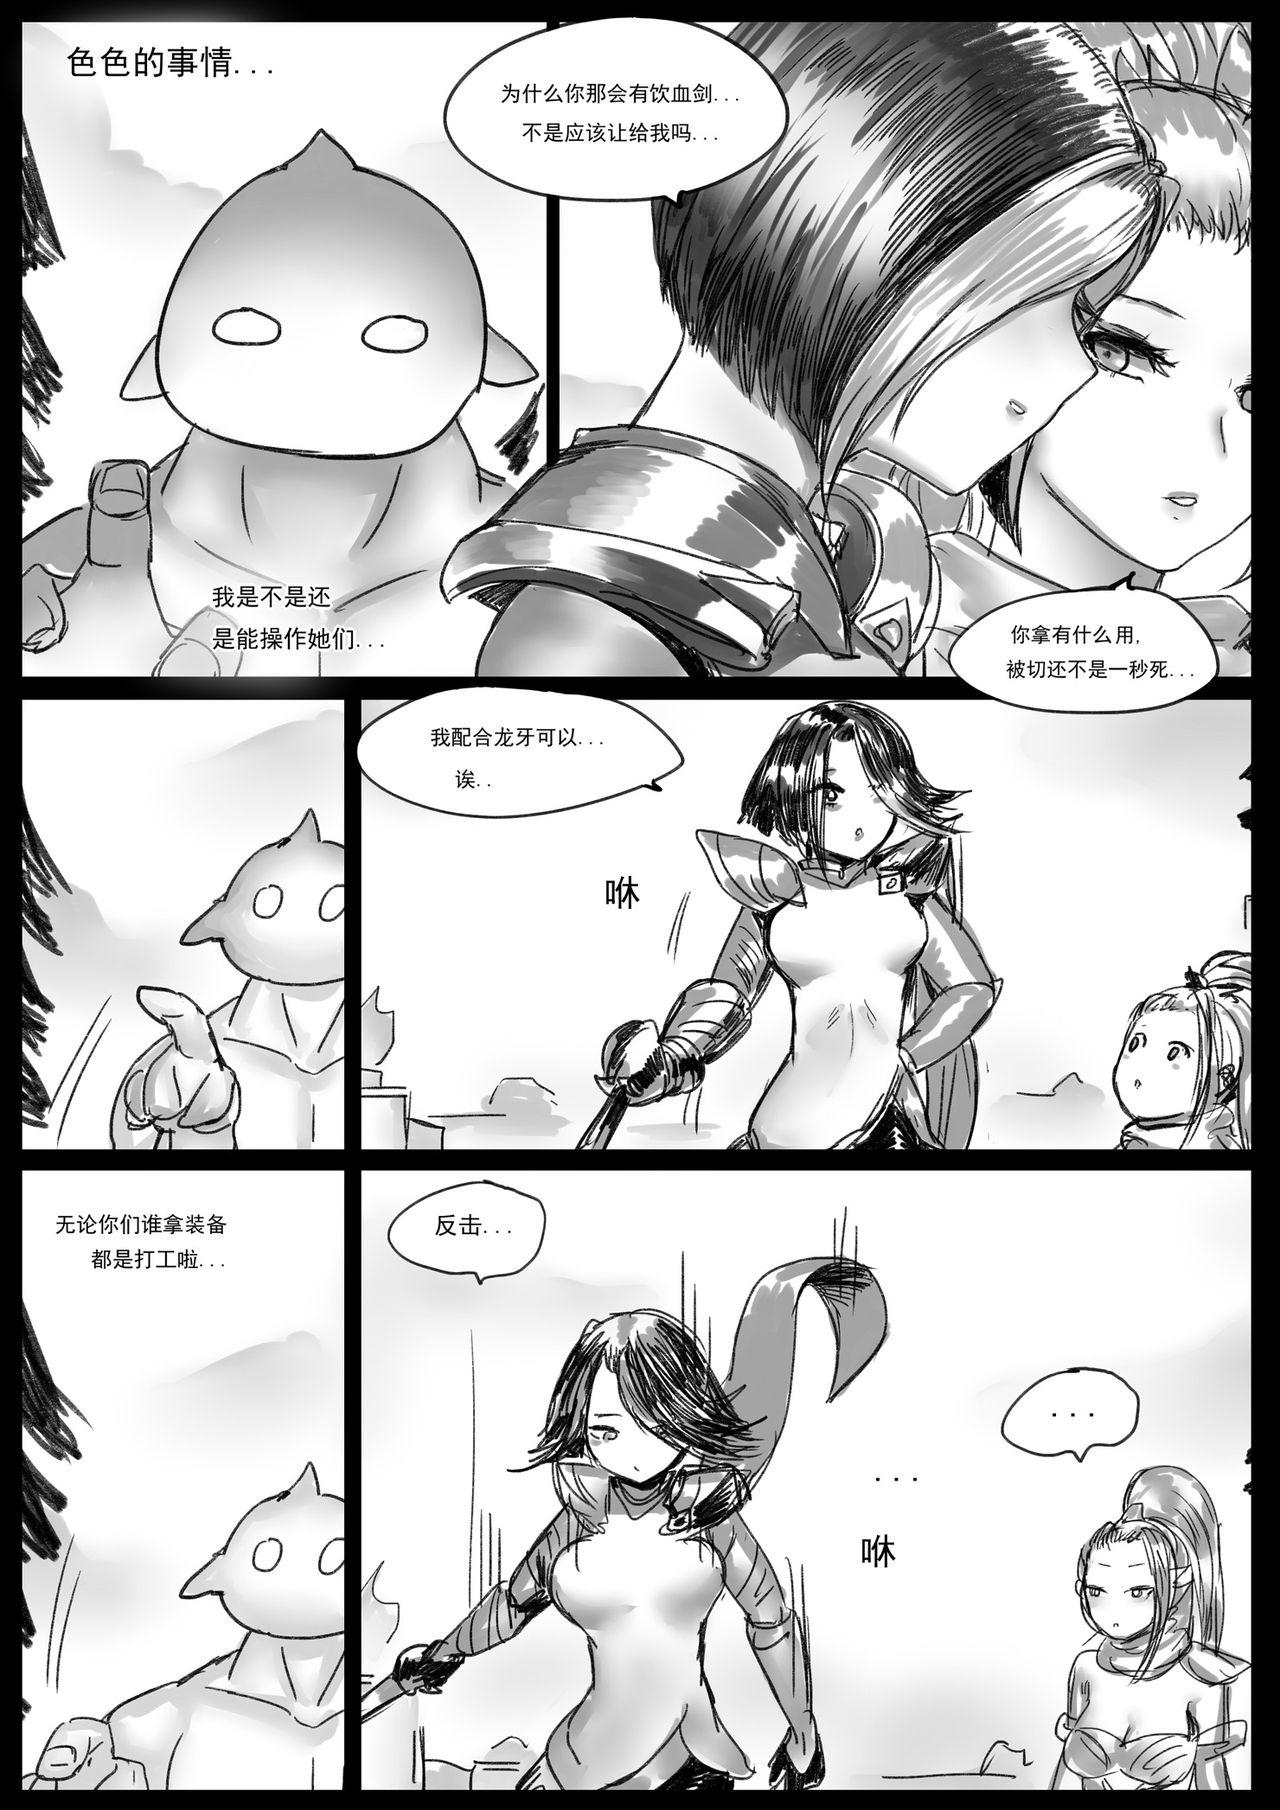 Mommy 云顶之灾上 - League of legends Morena - Page 5